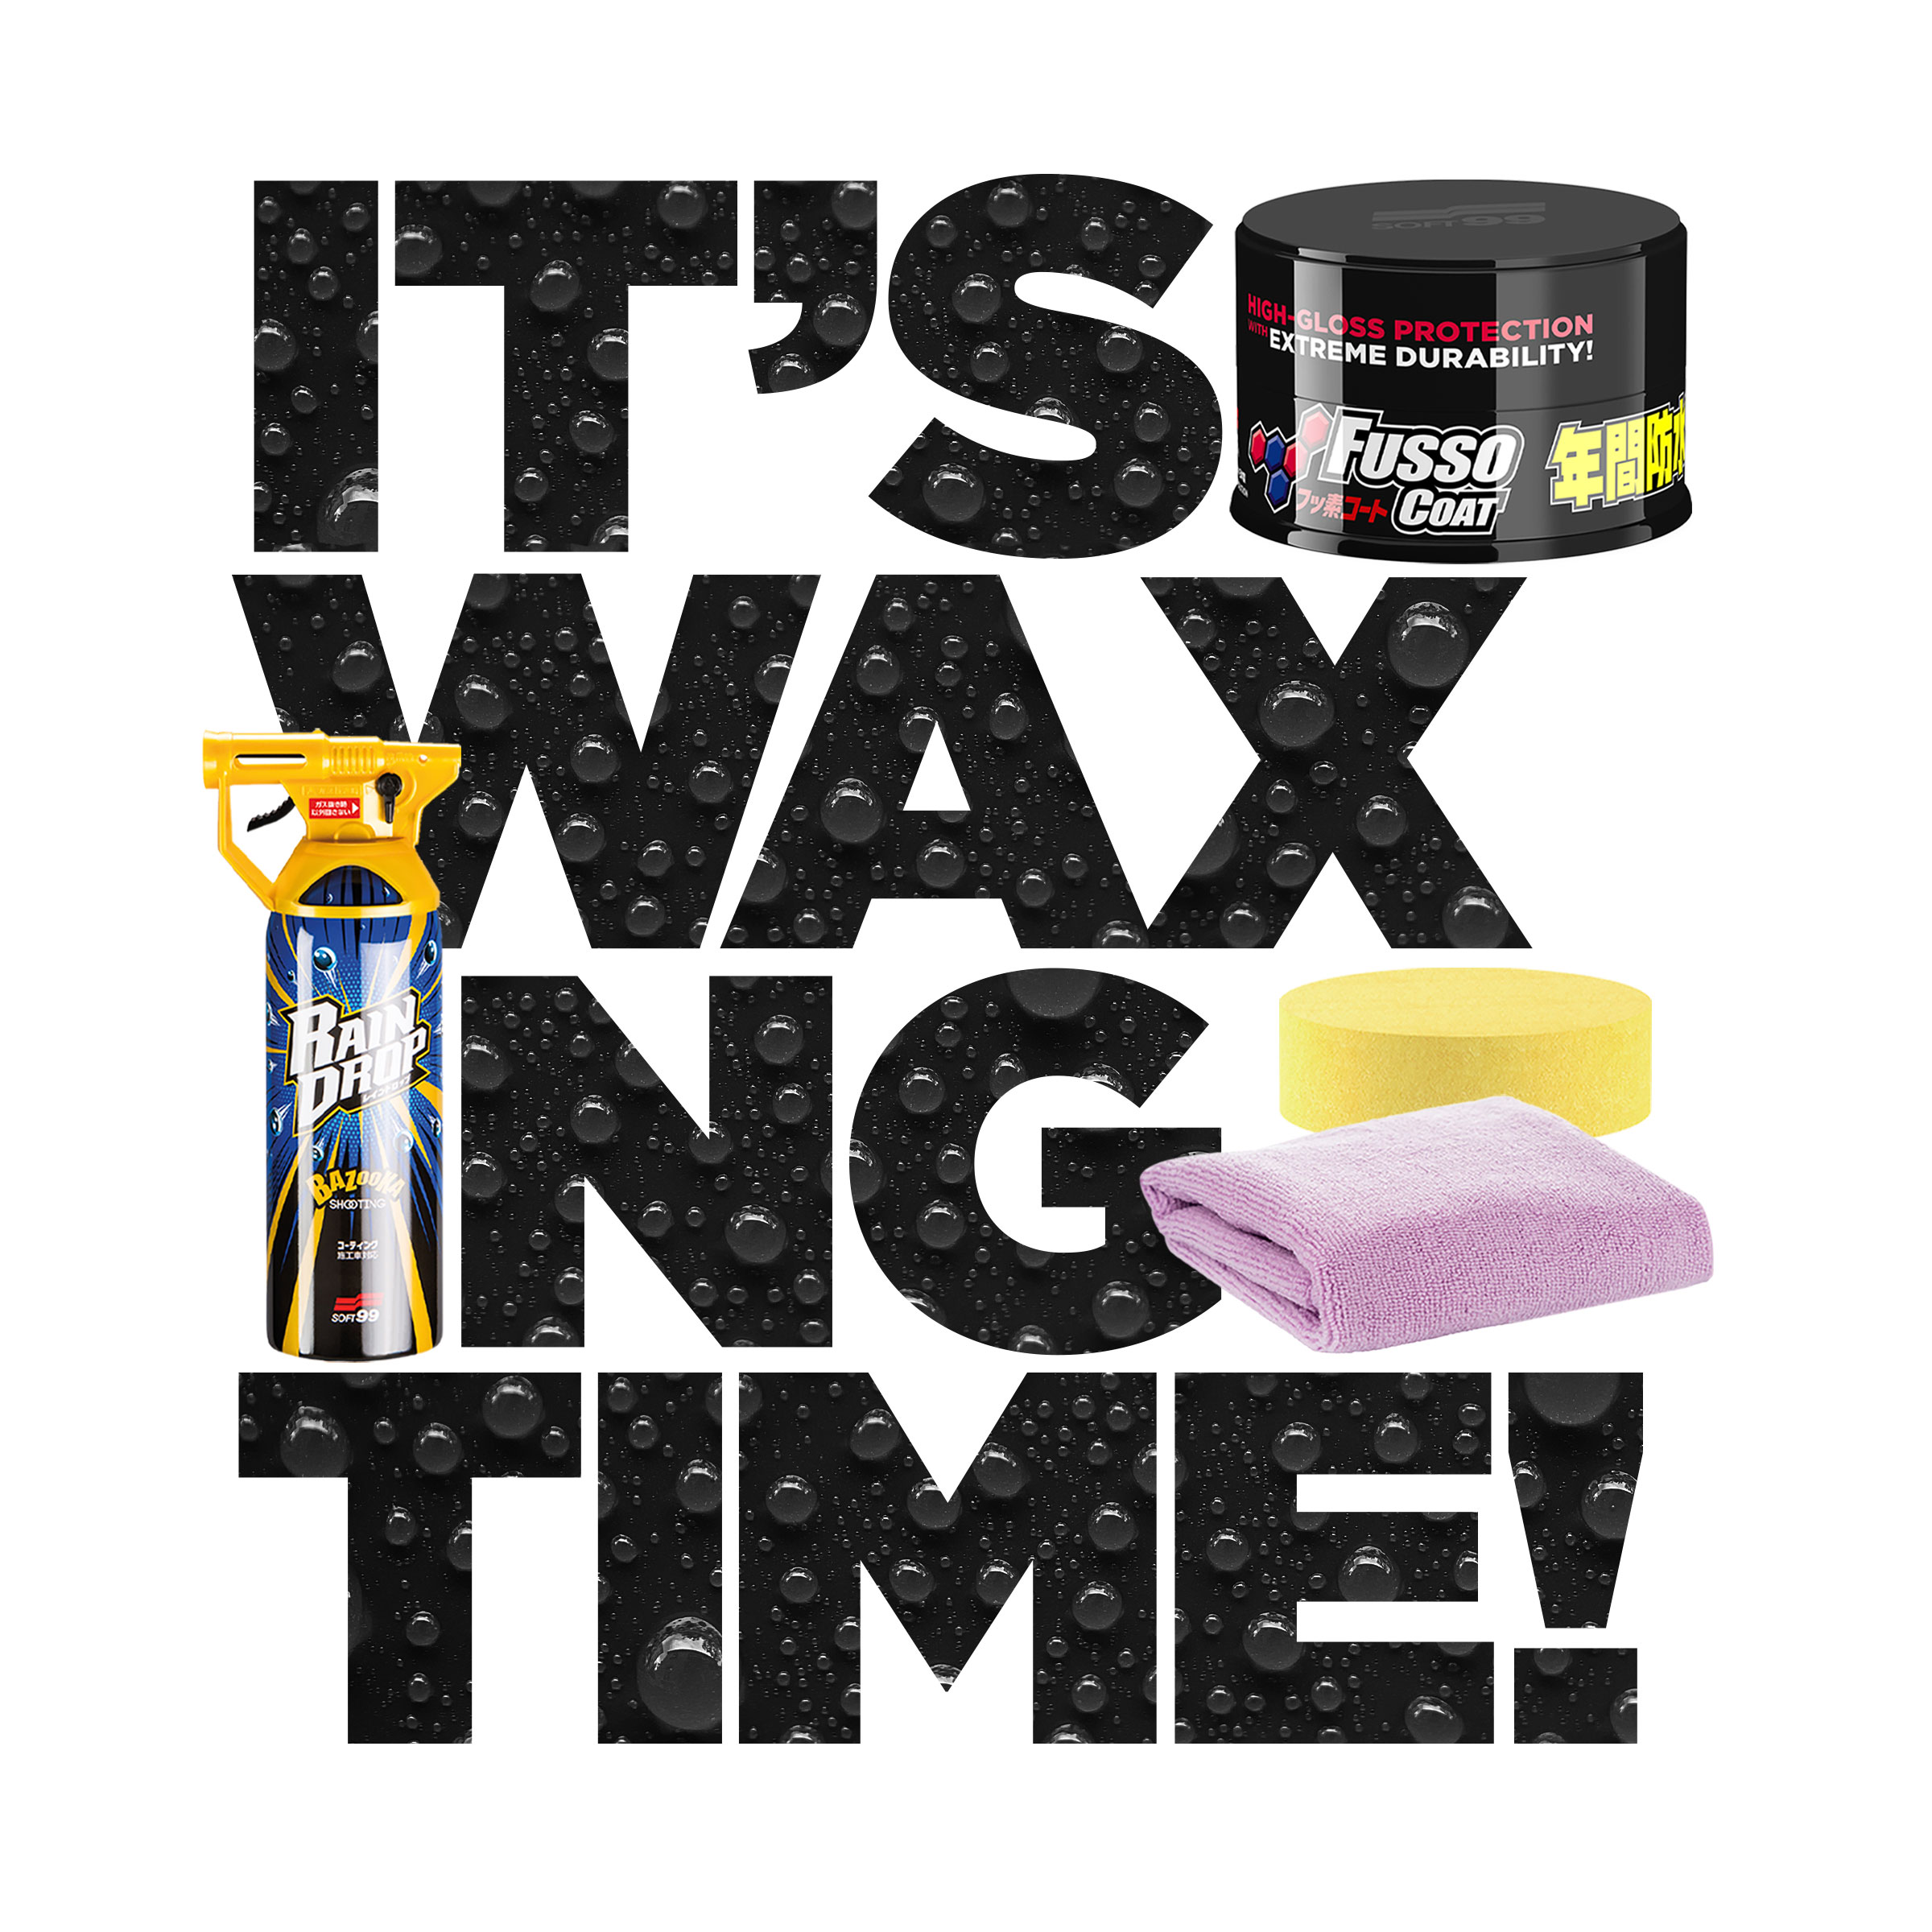 It's Waxing Time!